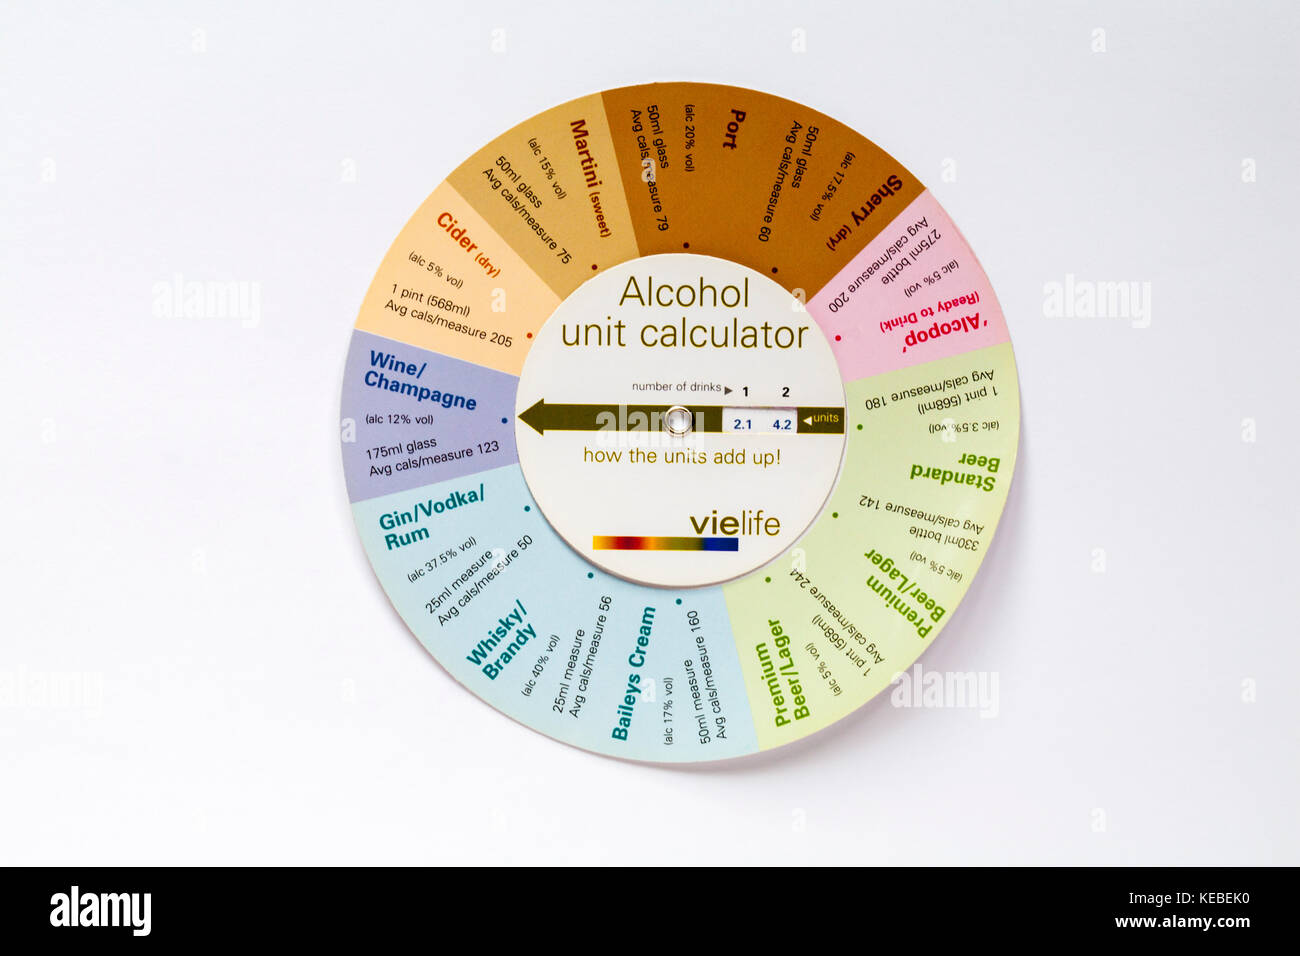 Alcohol unit calculator from vielife - select the type of alcohol and enter the number of drinks and it shows the number of units, on white background Stock Photo